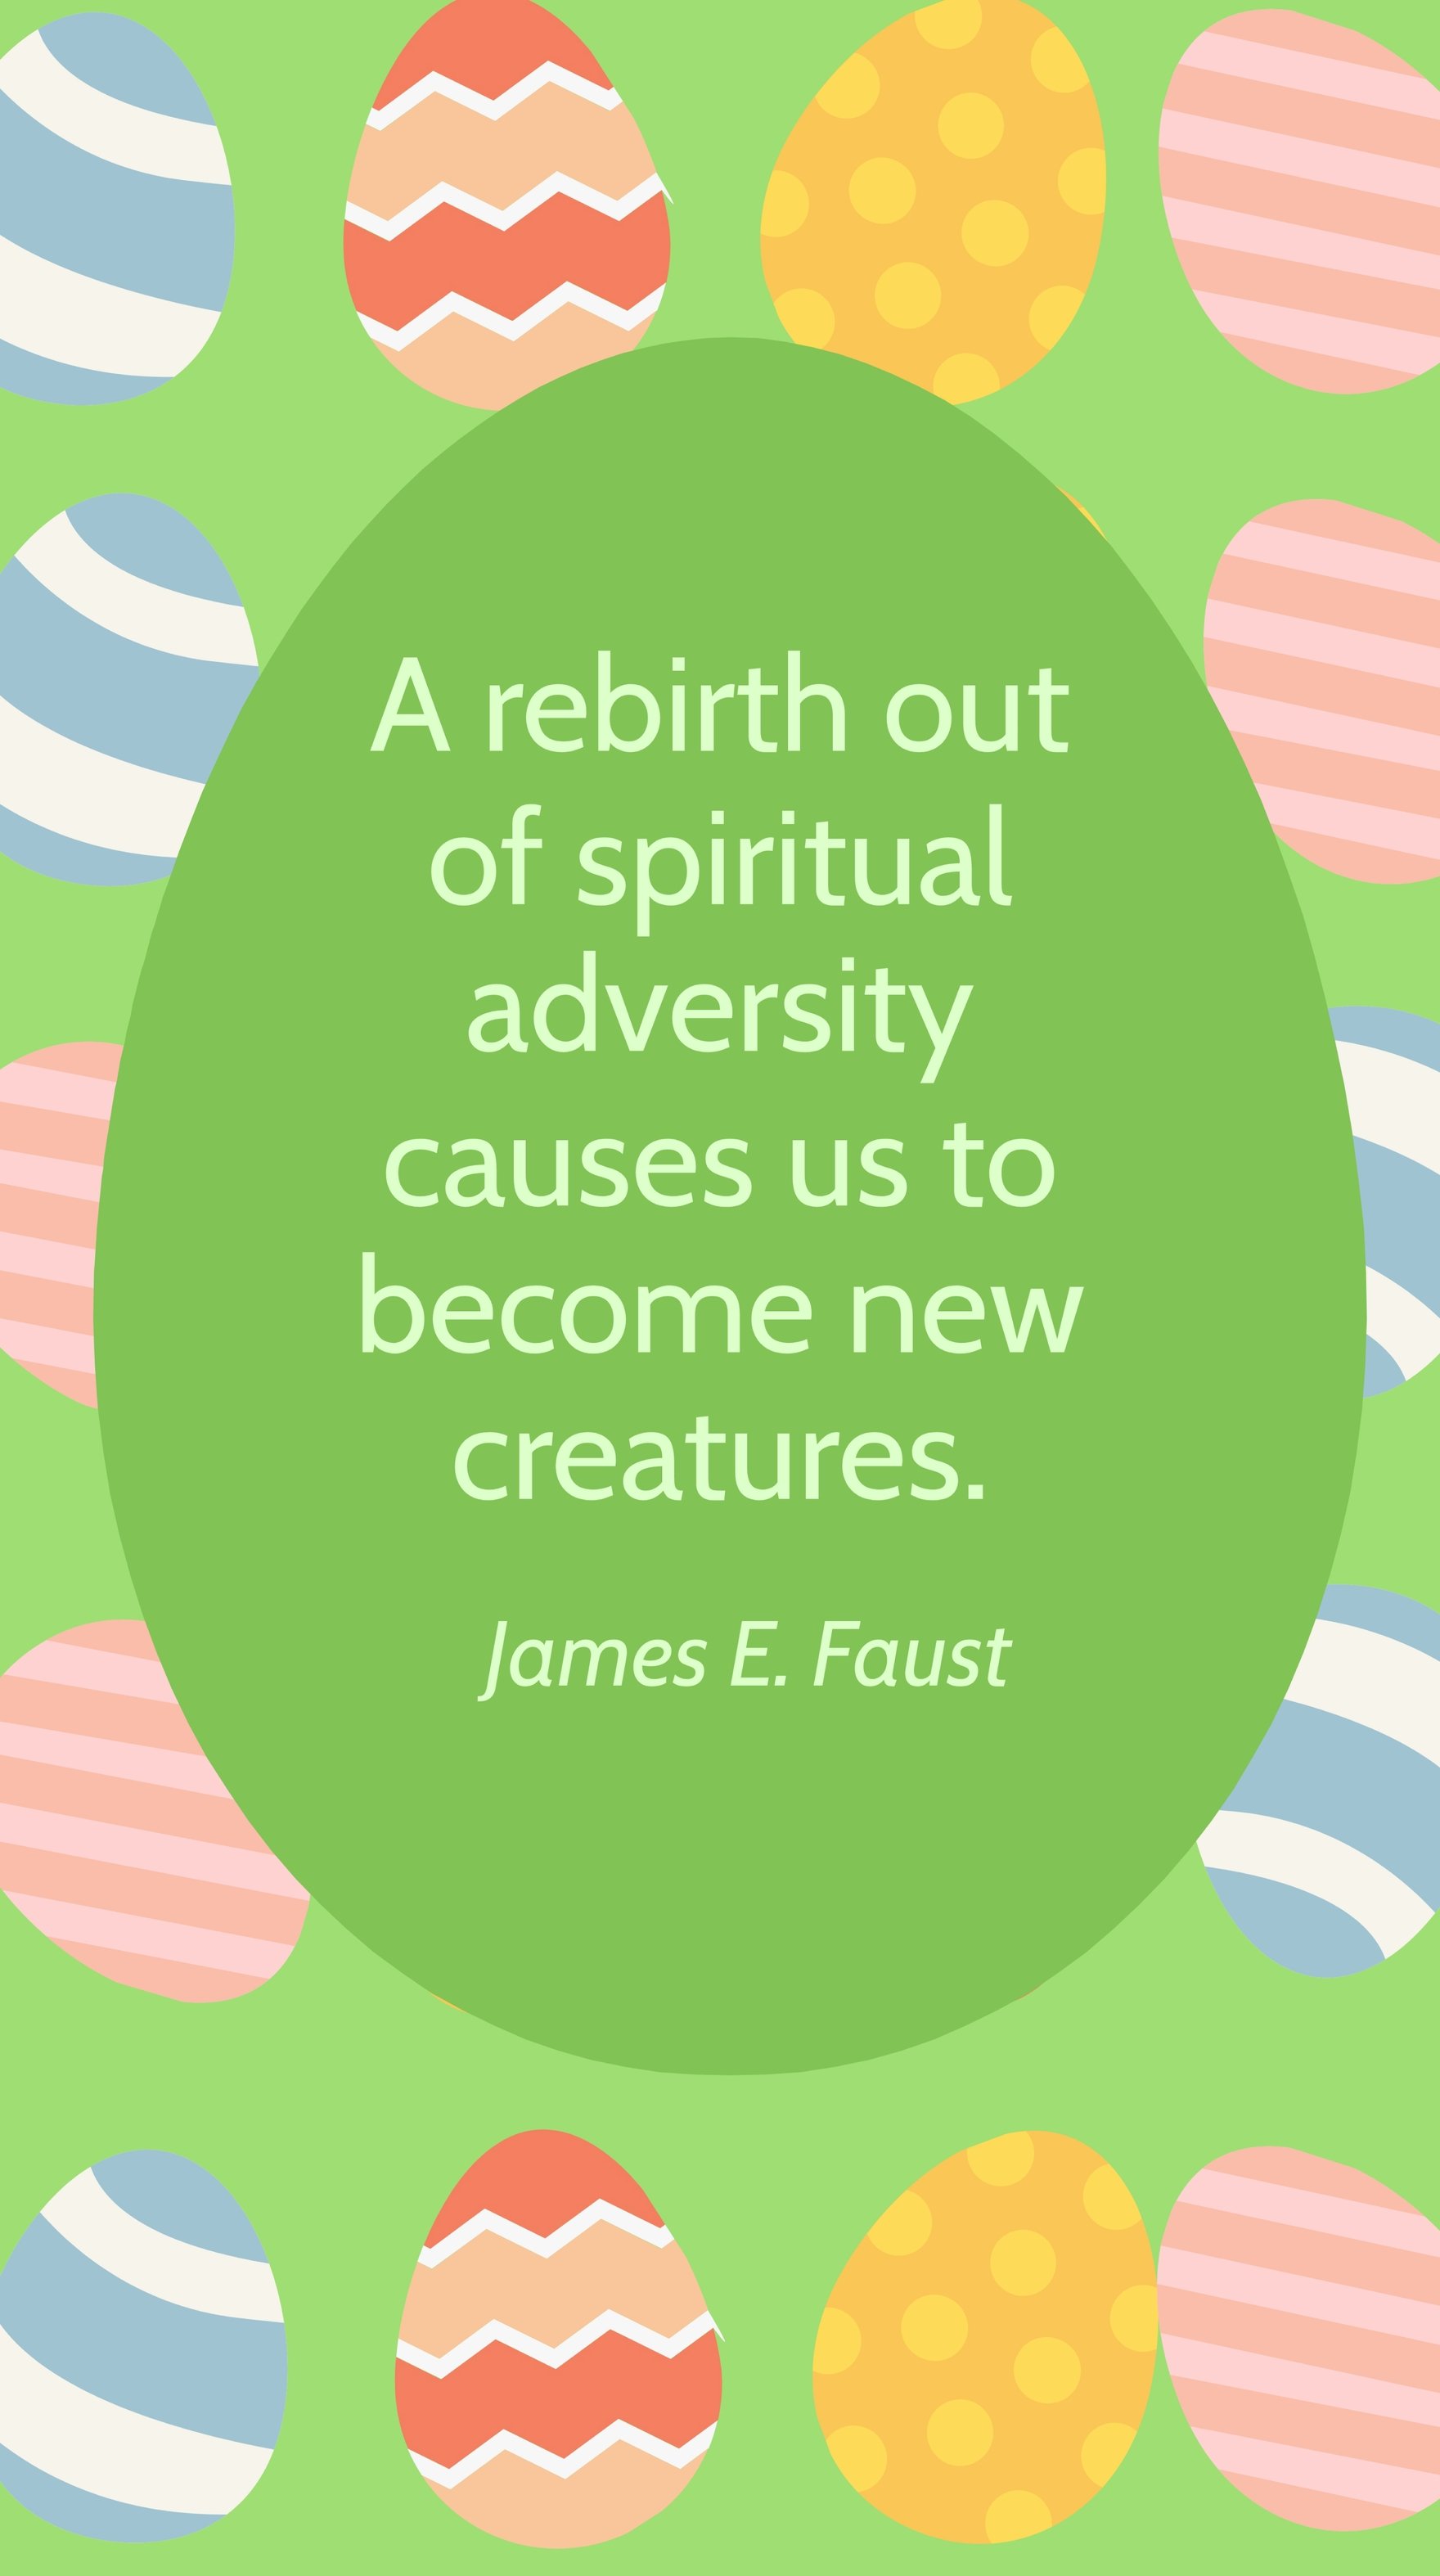 Free James E. Faust - A rebirth out of spiritual adversity causes us to become new creatures. in JPG